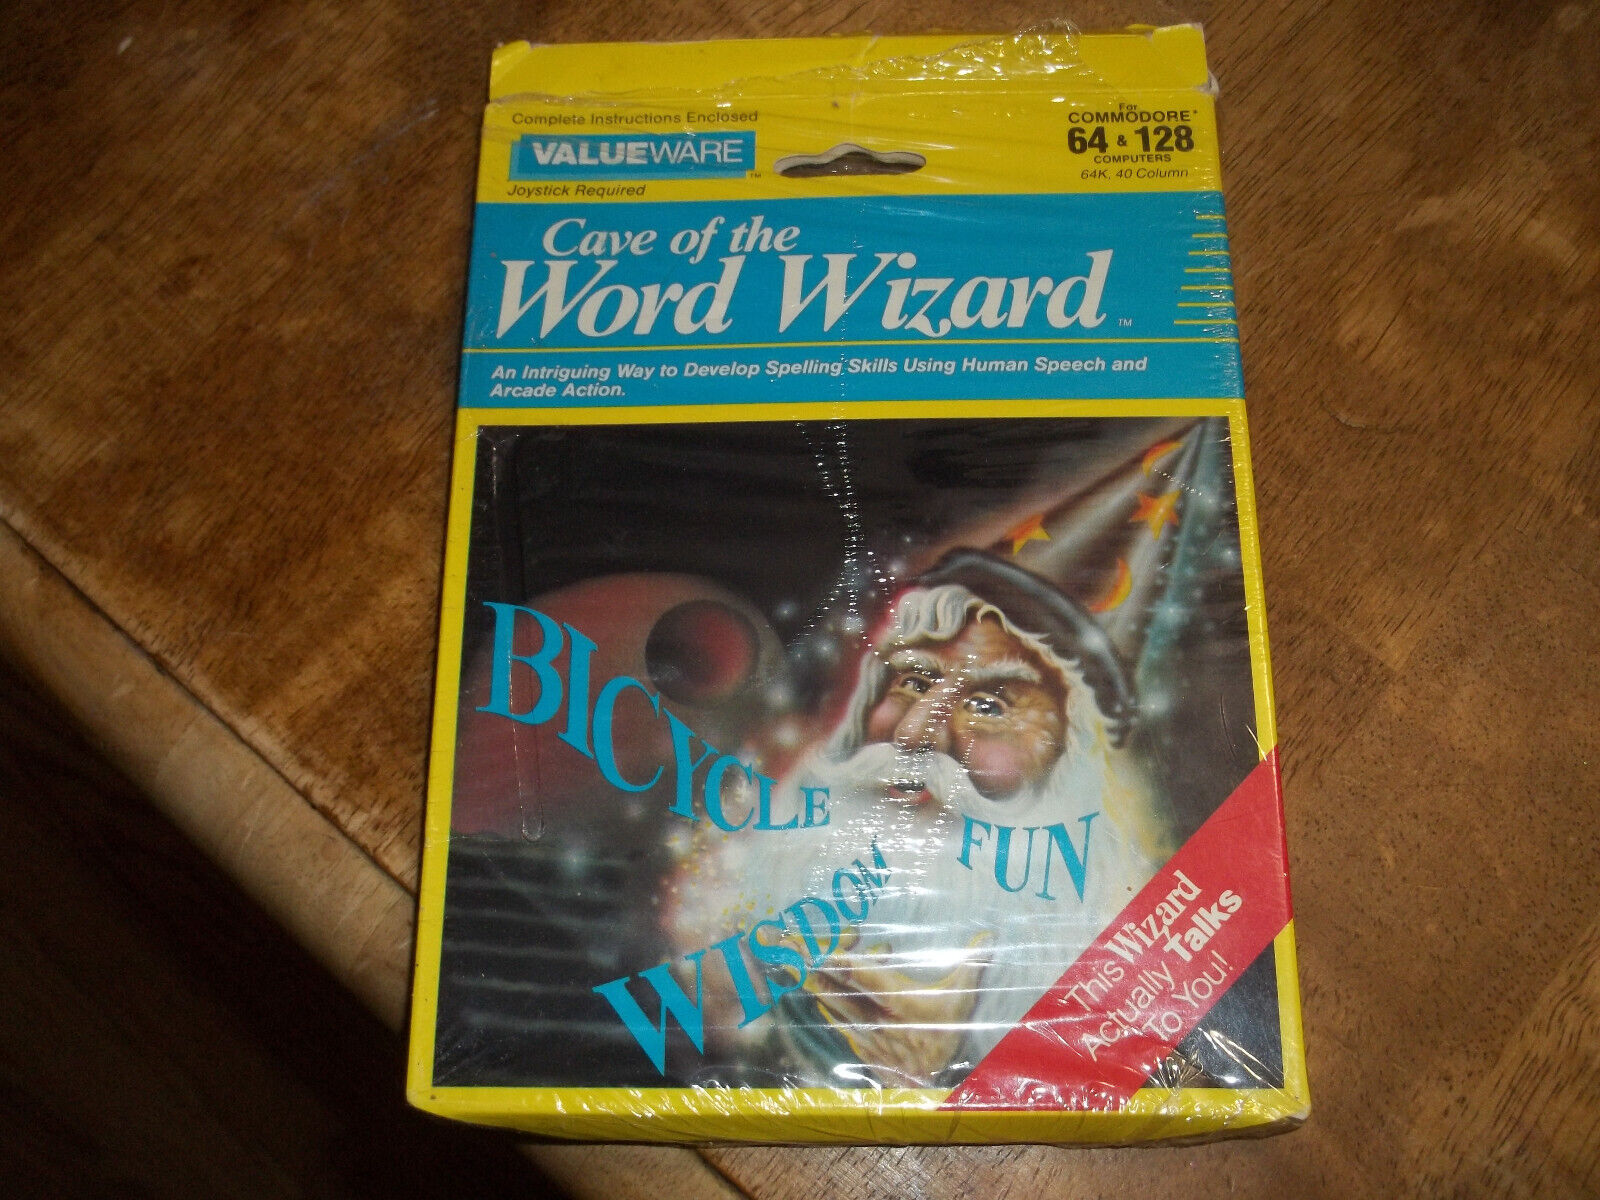 Cave Of The Word Wizard - Commodore 64/128 Computer Game